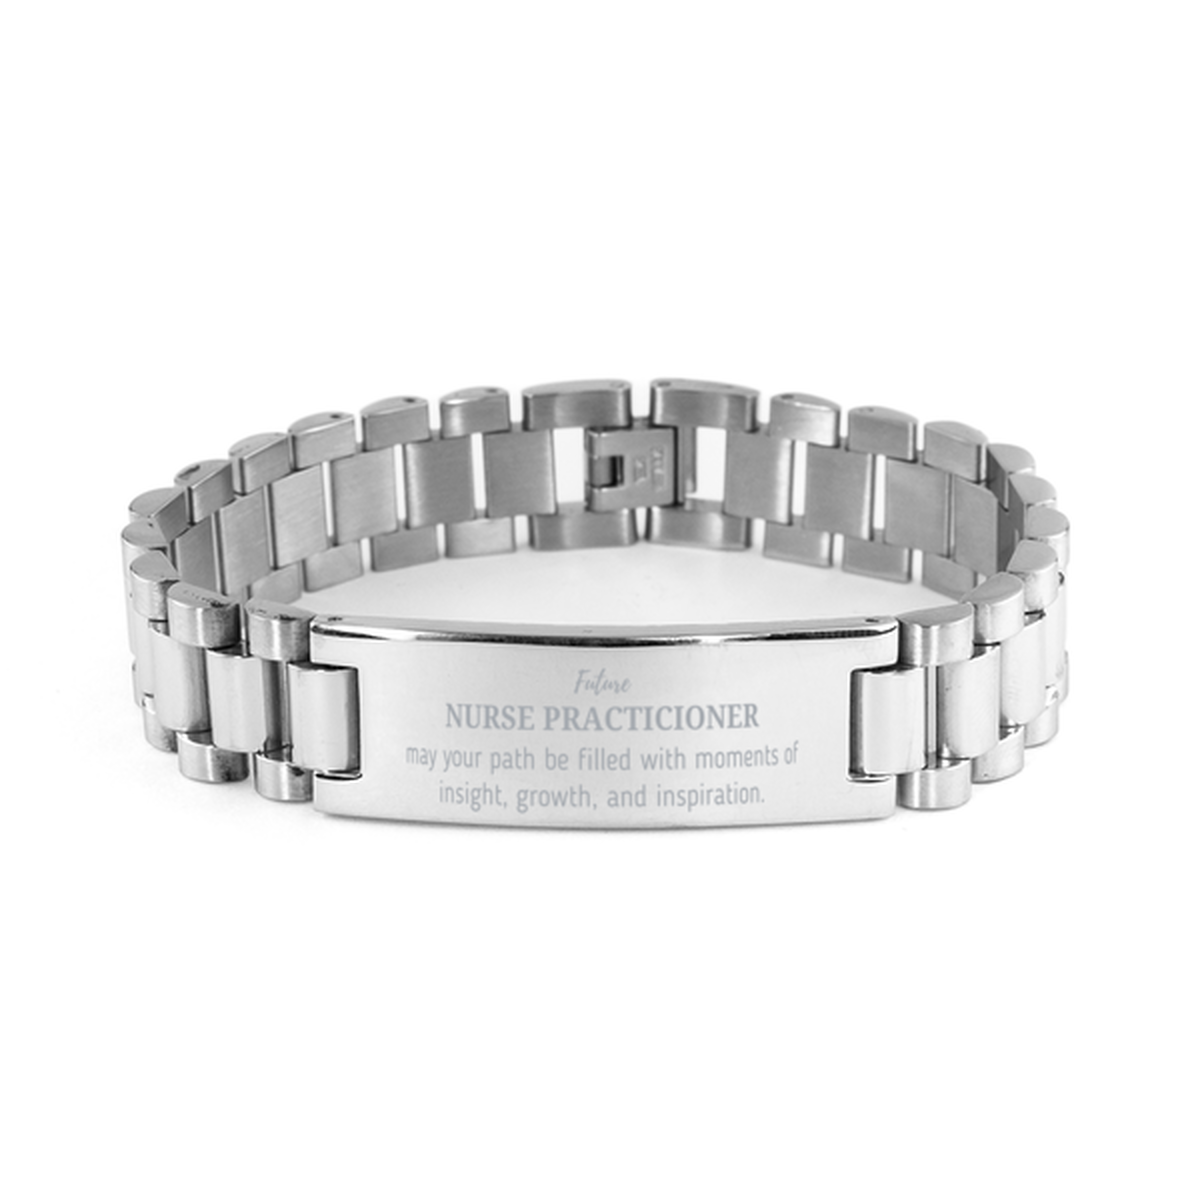 Future Nurse Practicioner Gifts, May your path be filled with moments of insight, Graduation Gifts for New Nurse Practicioner, Christmas Unique Ladder Stainless Steel Bracelet For Men, Women, Friends